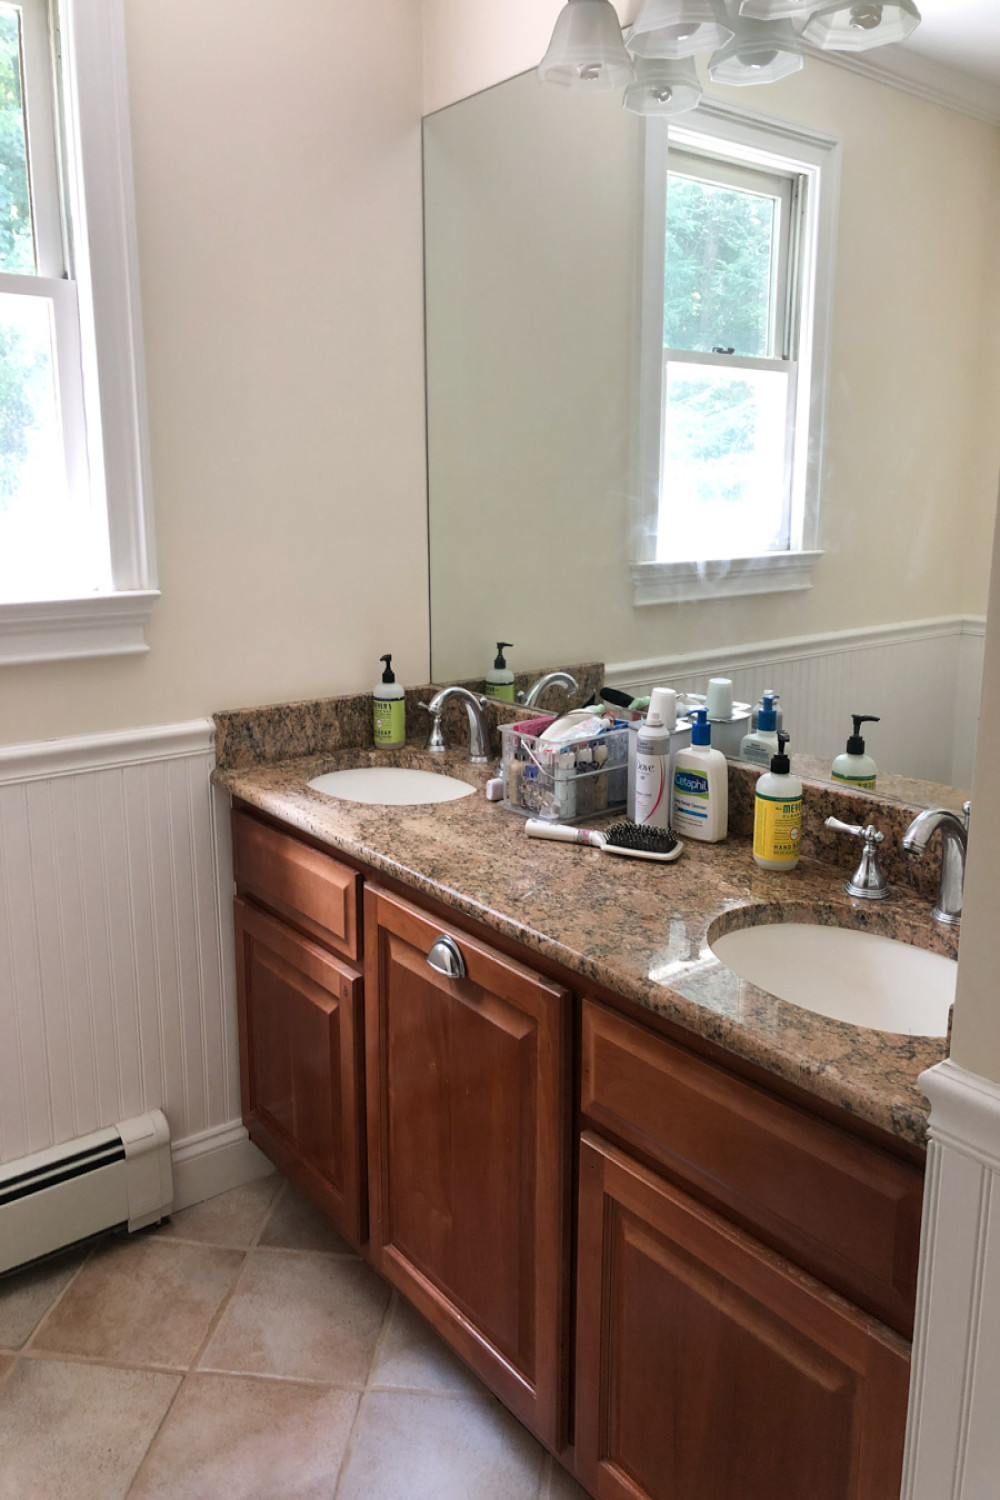 Our Painted Bathroom Vanity: The "Before" & "After" and How-to